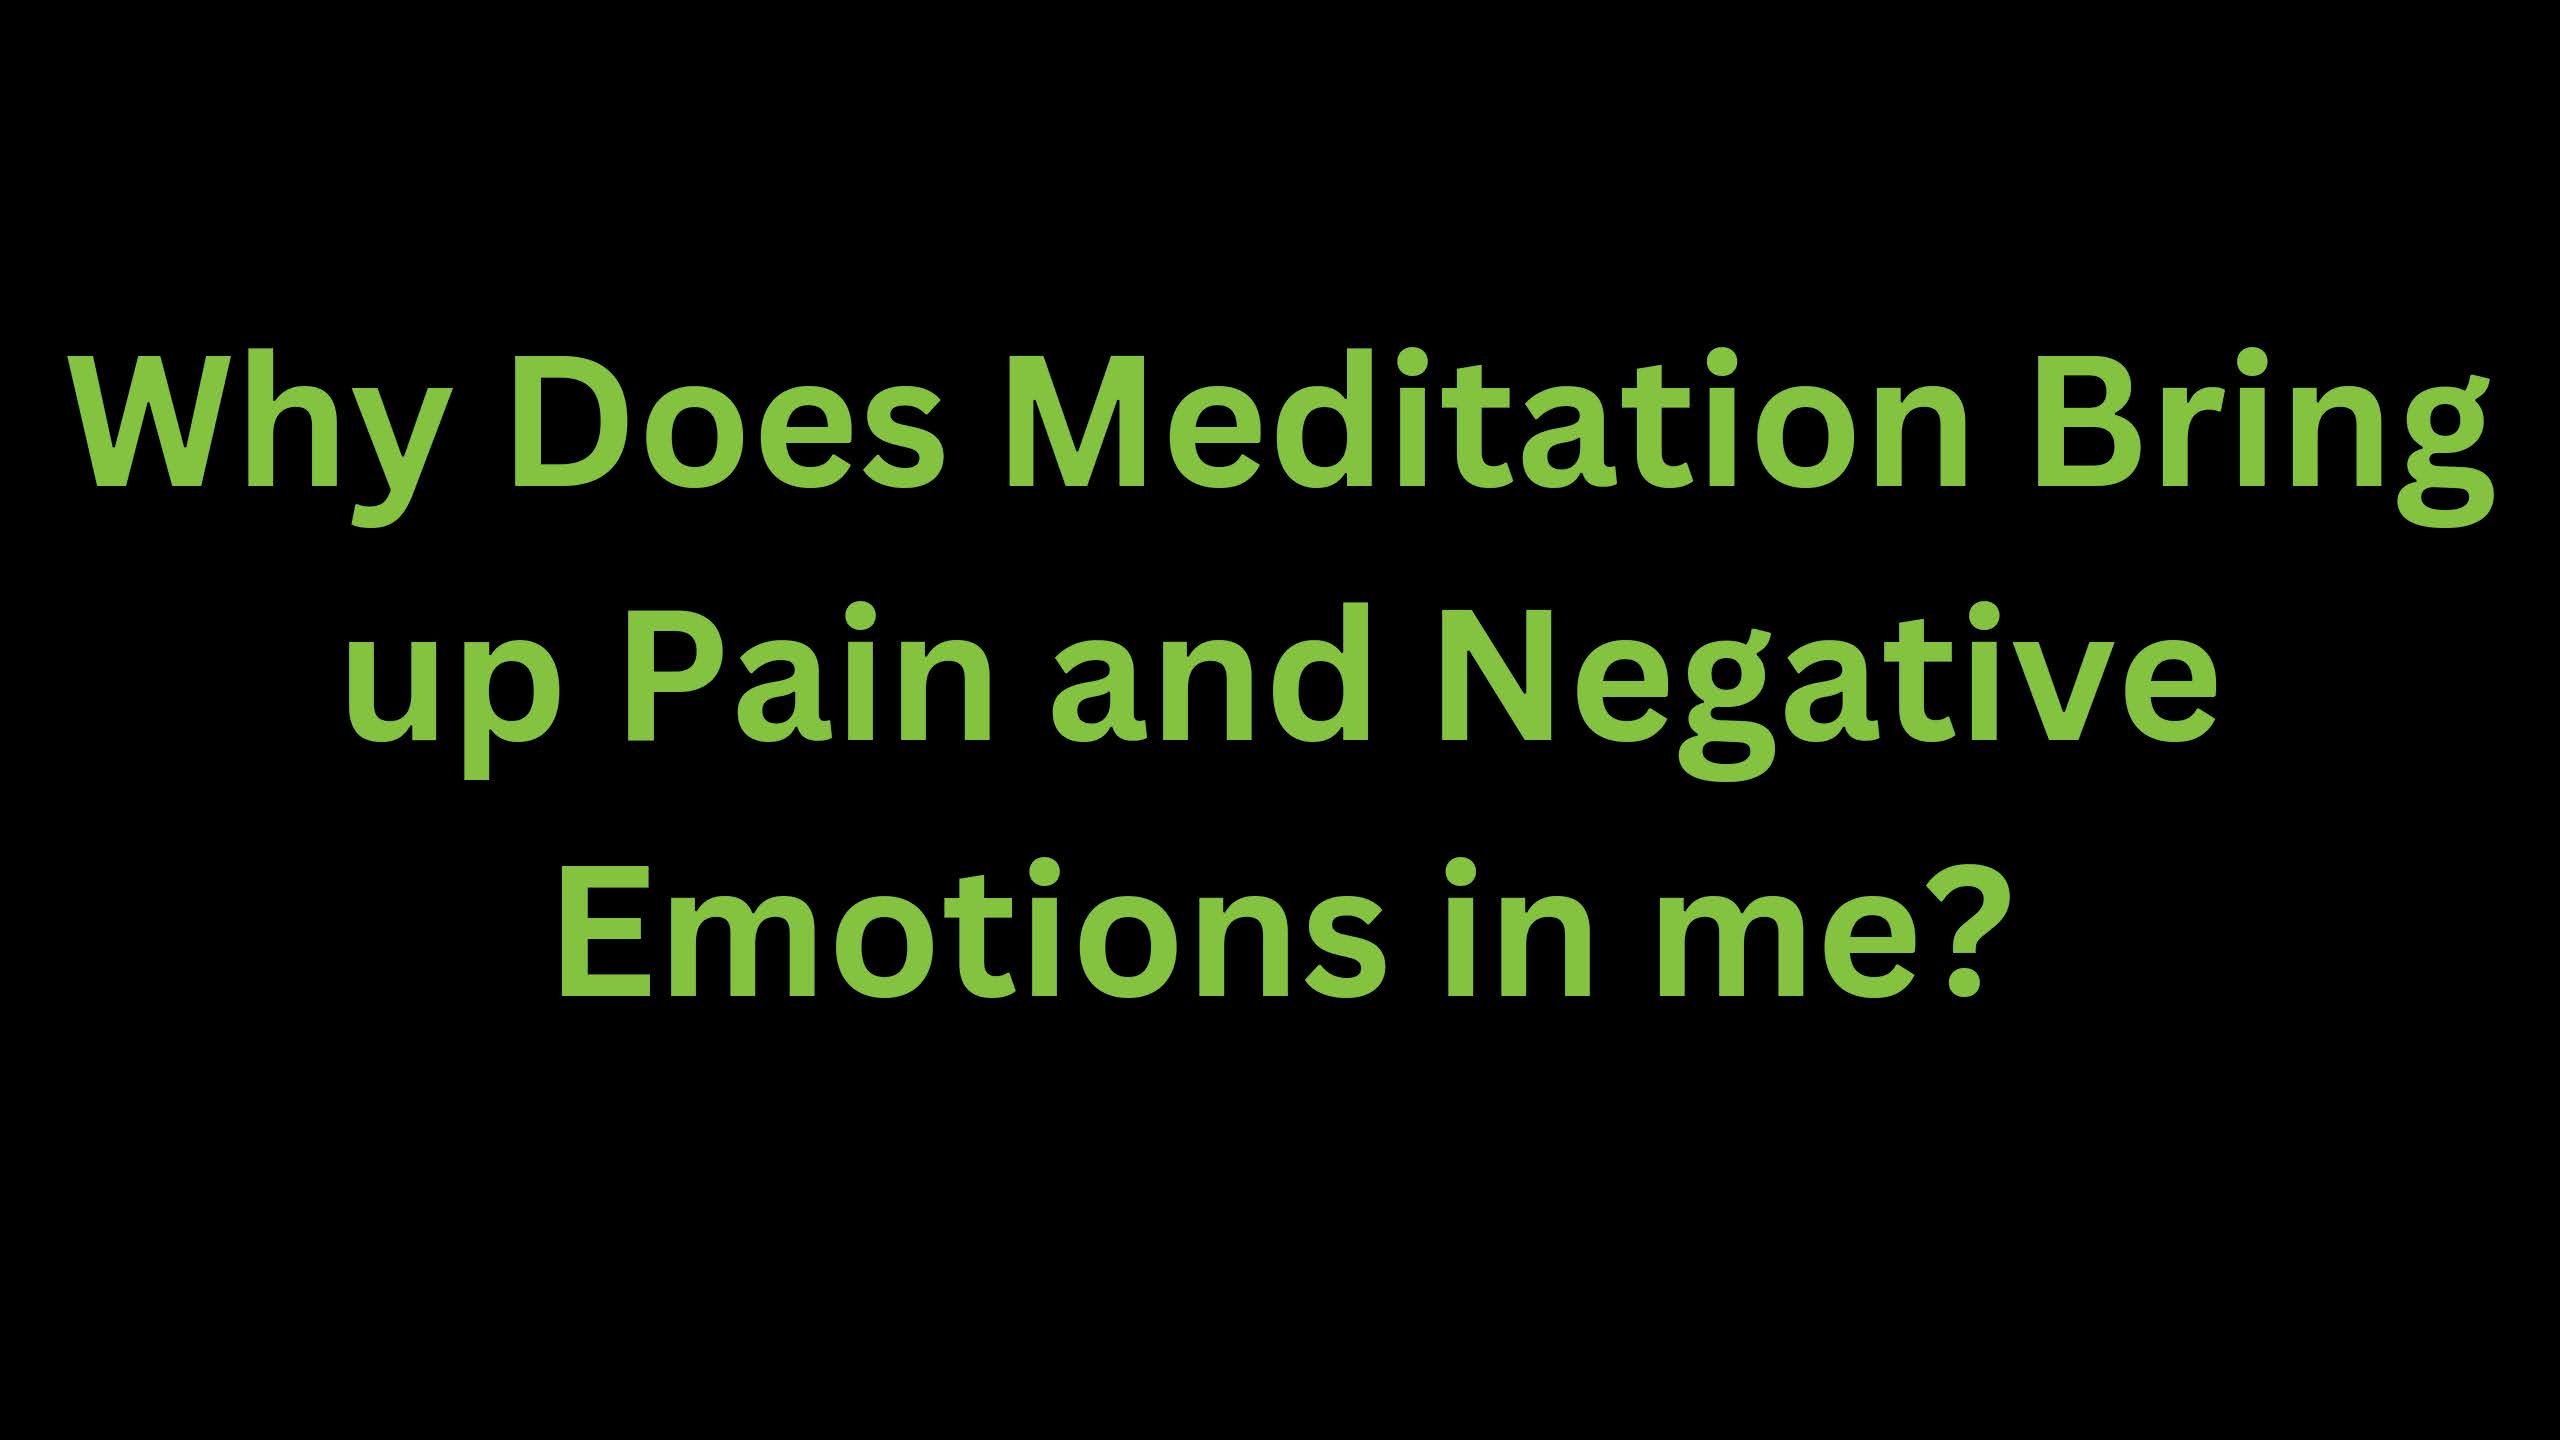 You are currently viewing Why Does Meditation Bring up Pain and Negative Emotions in me?